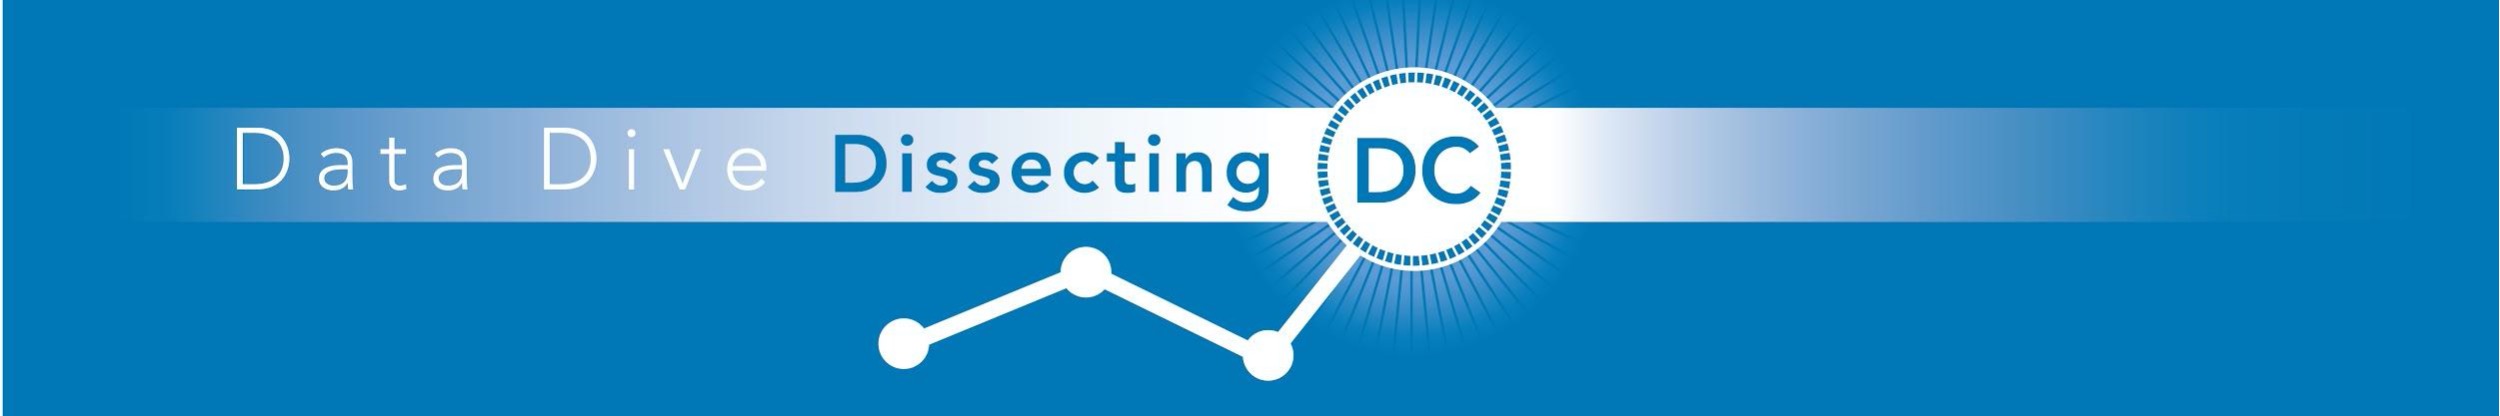 Data Dive Dissecting DC